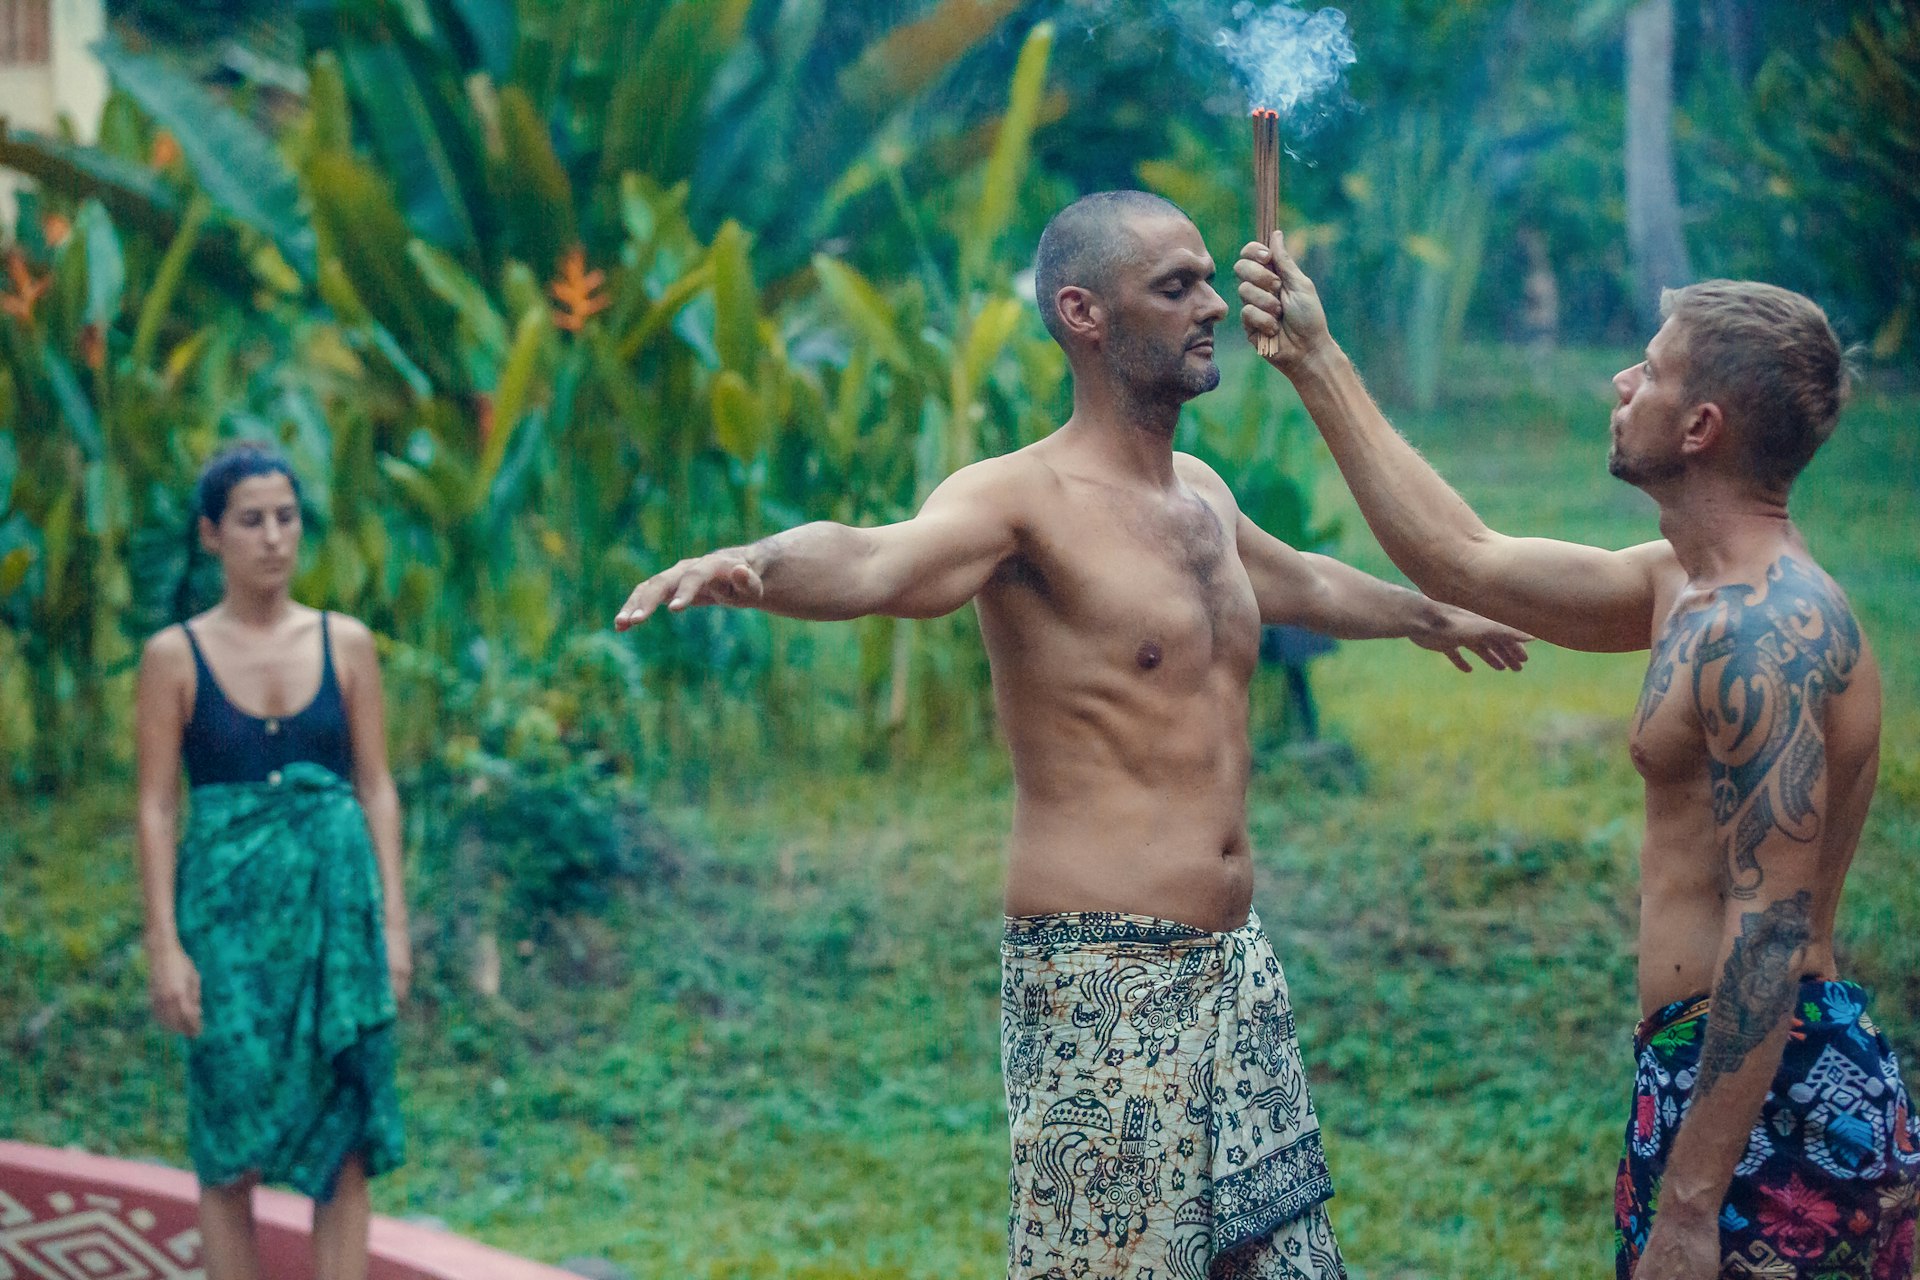 A man stands before a Shaman in a jungle setting while smoke is wafted over his head